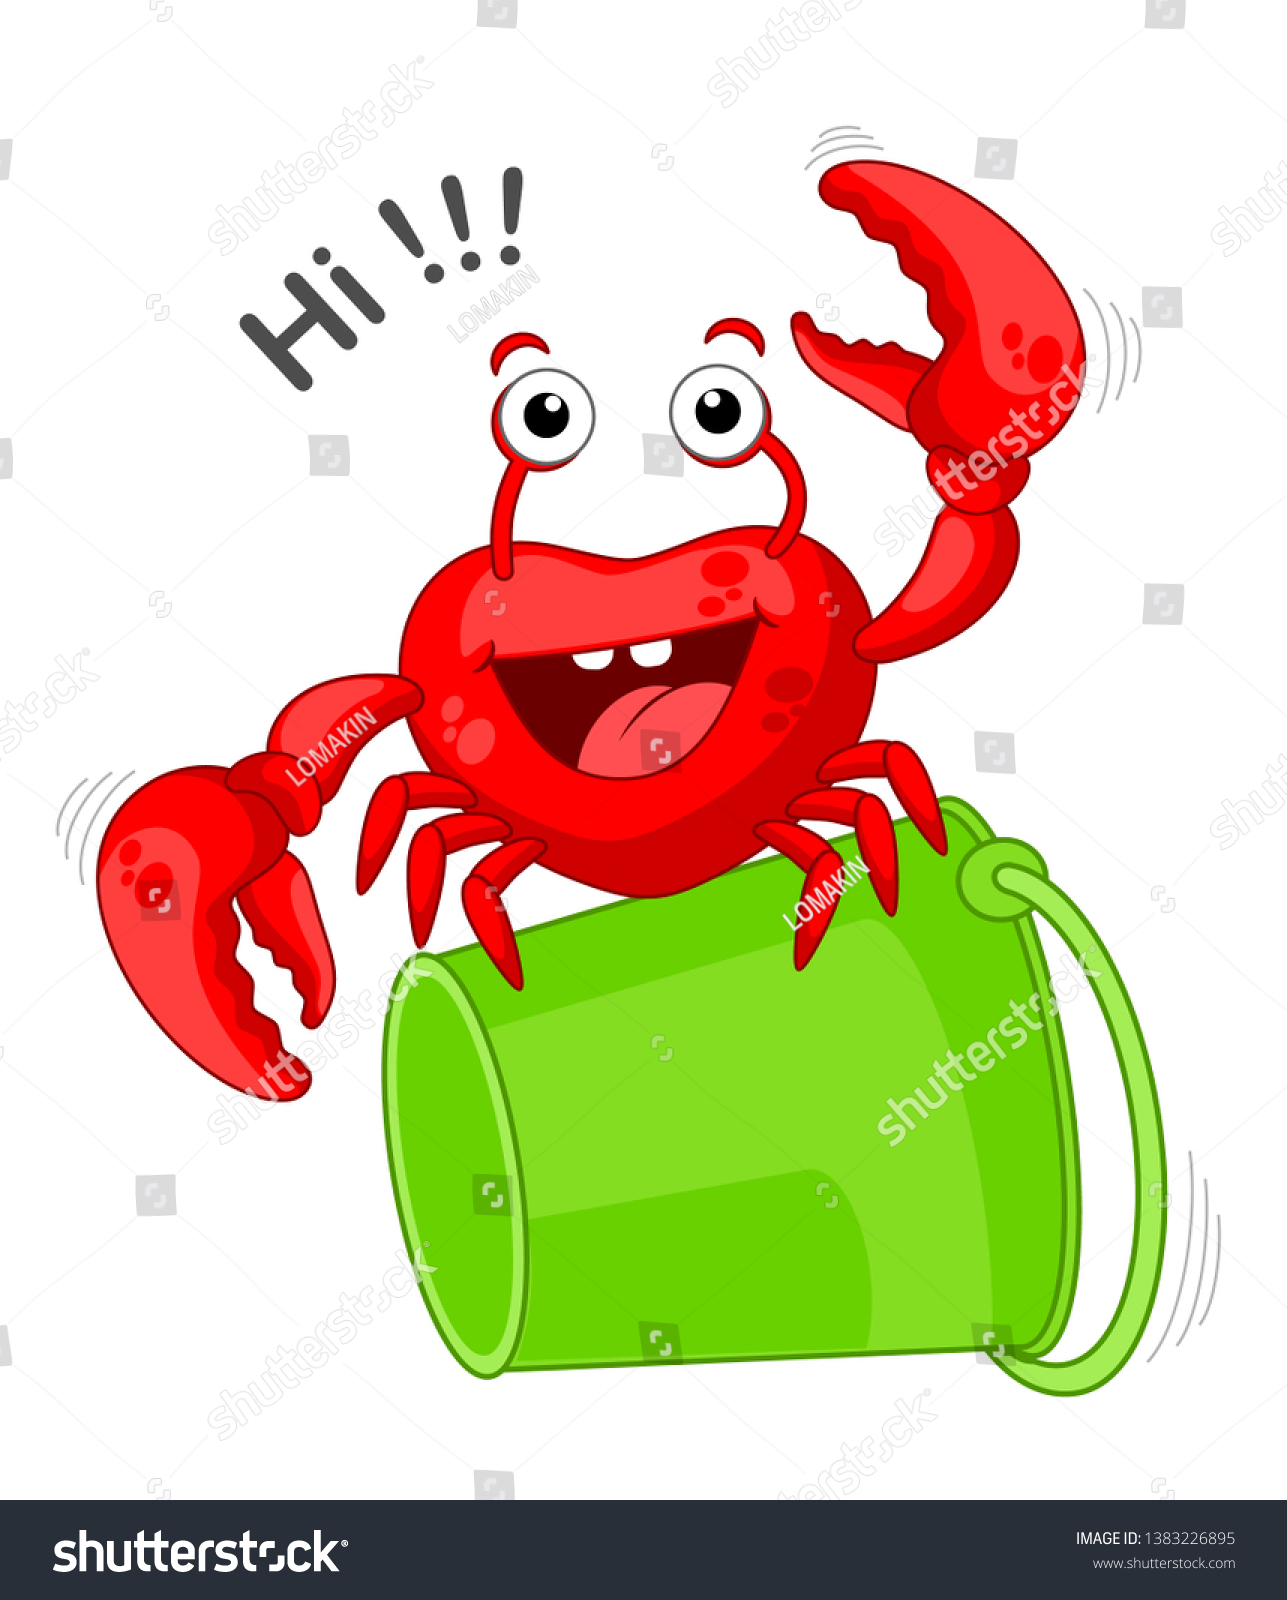 SVG of Red crab saying hello, funny crab . Vector illustration - crab on white background svg